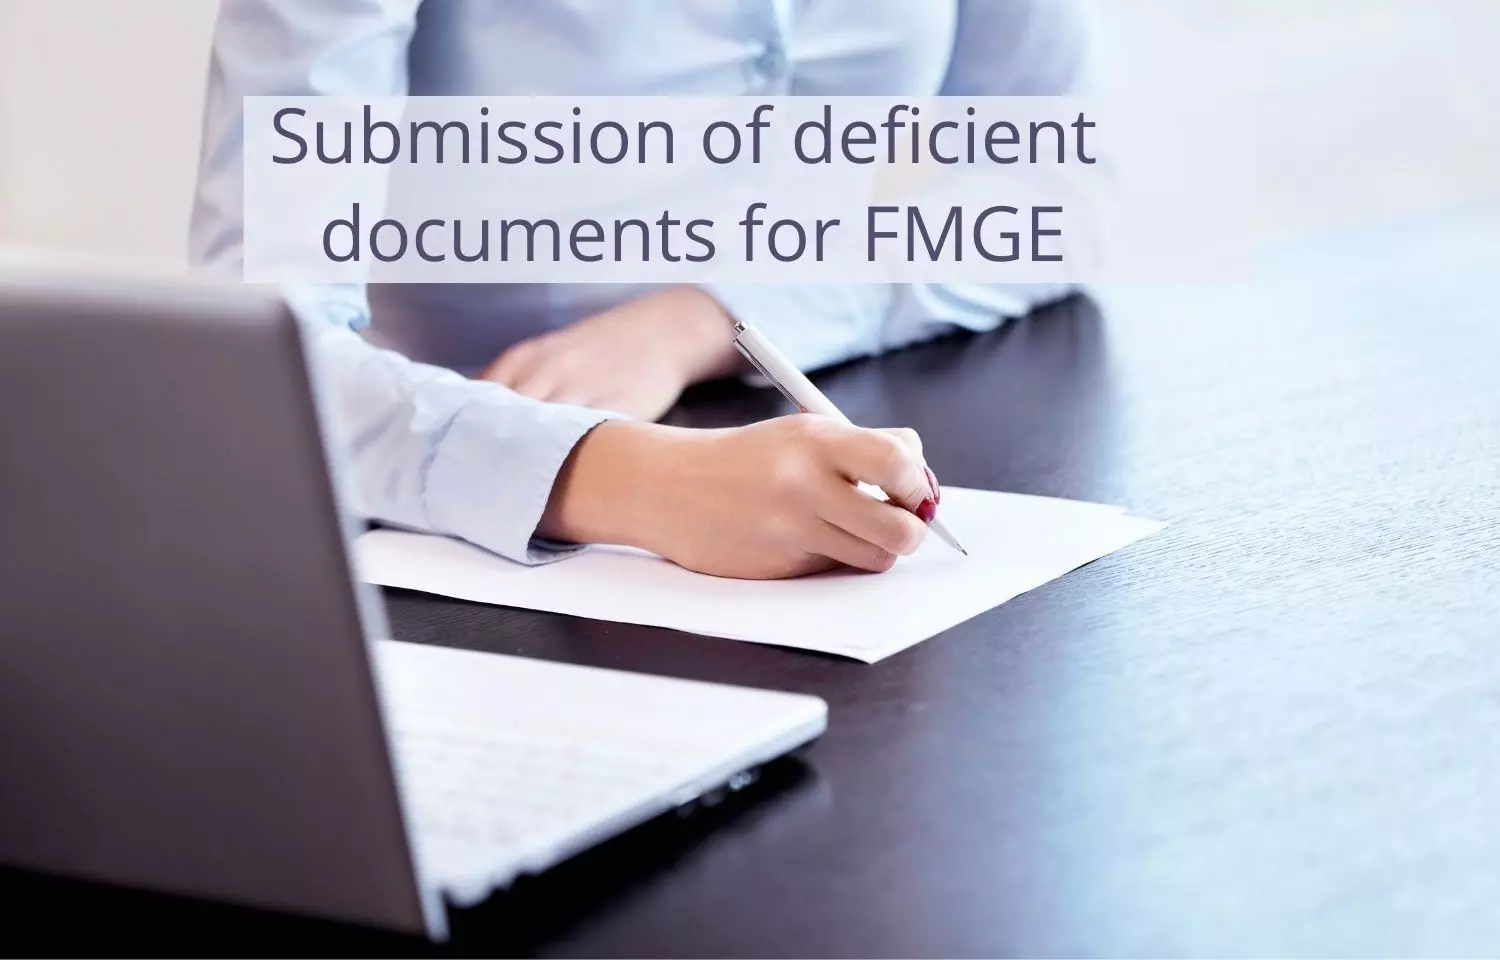 NBE gives Final Opportunity for submission of deficient documents for FMGE June 2022, Details